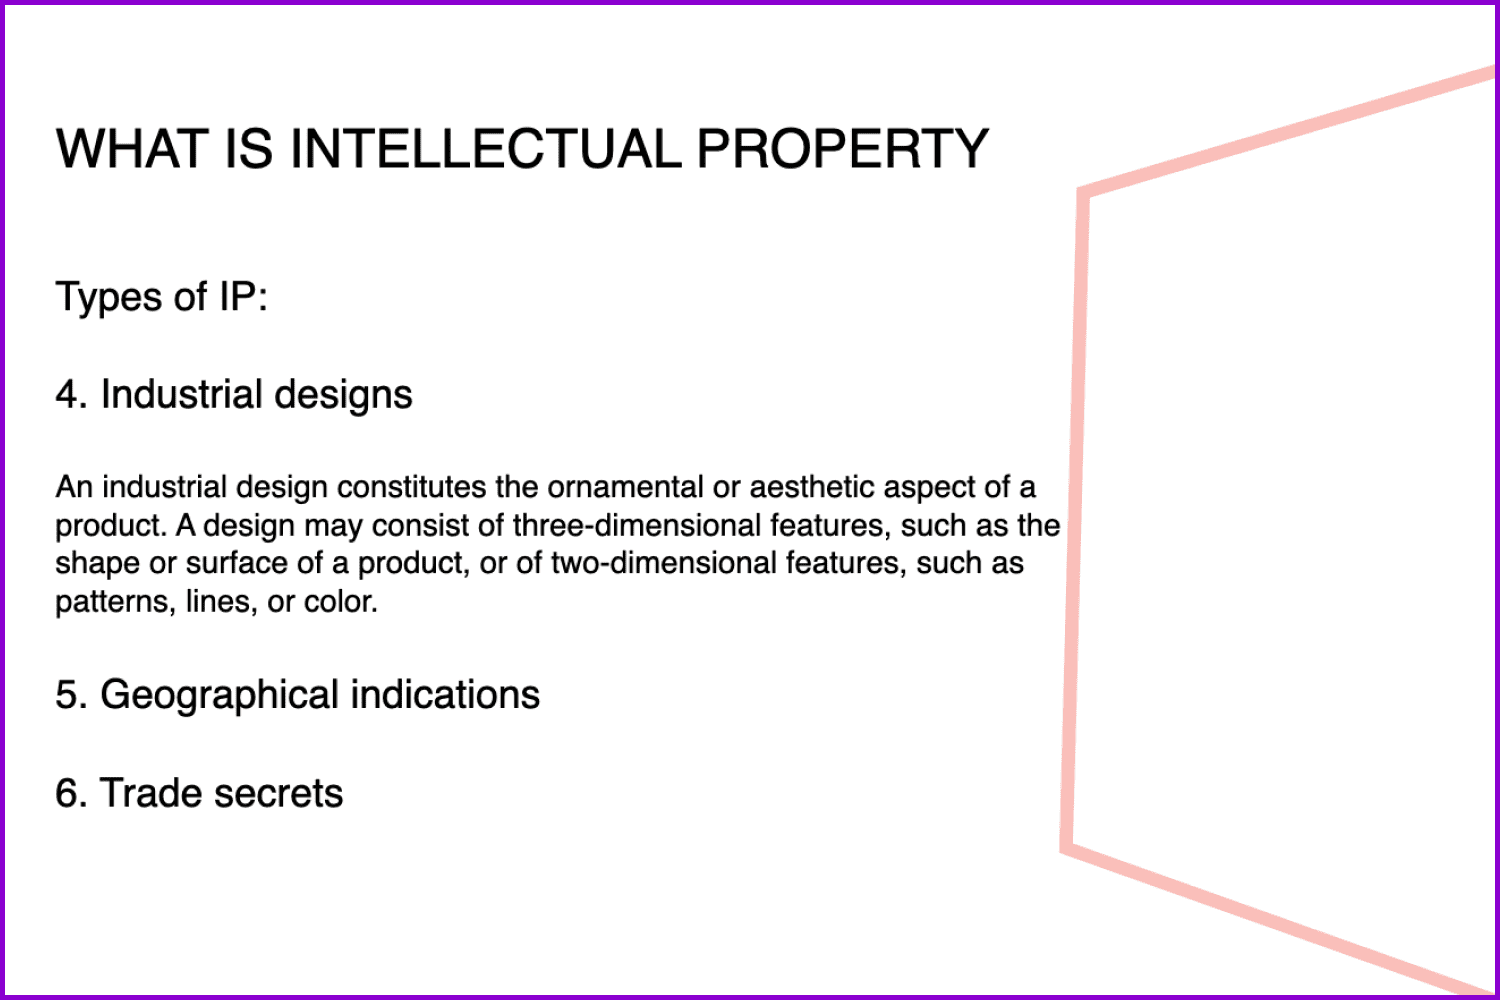 Industrial designs, geographical indications, and trade secrets are other types of intellectual property.